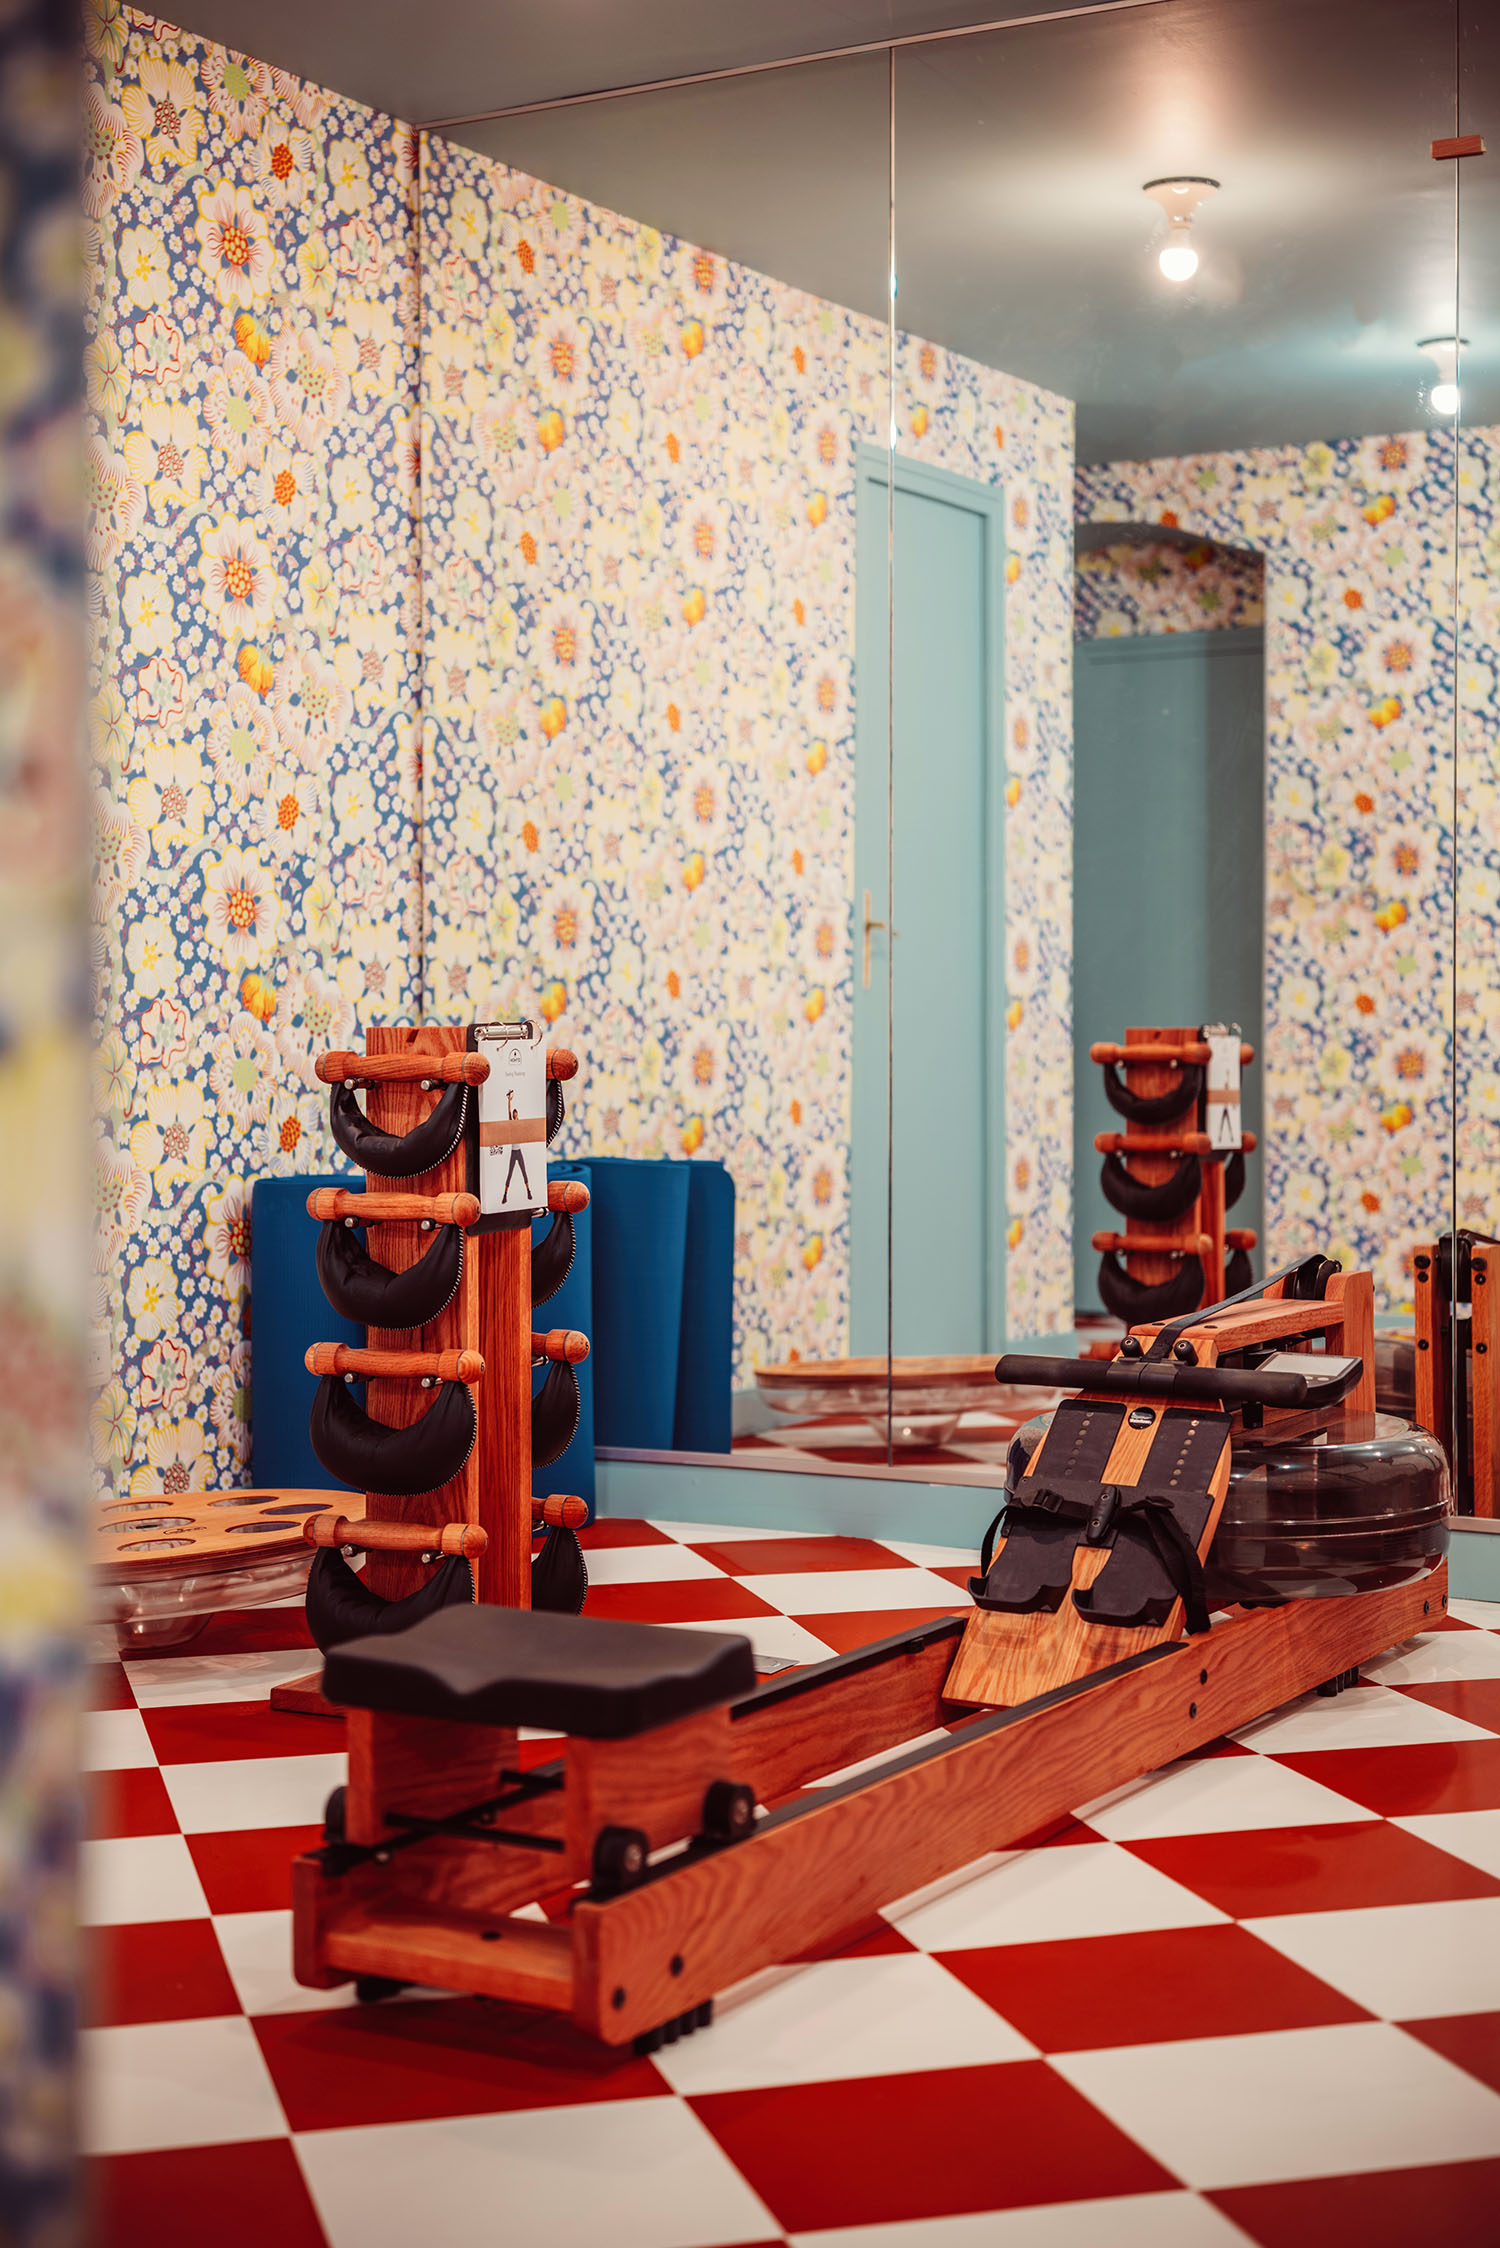 The playfully designed gym room at Hotel les Deux Gares with a vintage rowing machine, red and white checkerboard floors and cartoonish blue, purple and yellow floral walls